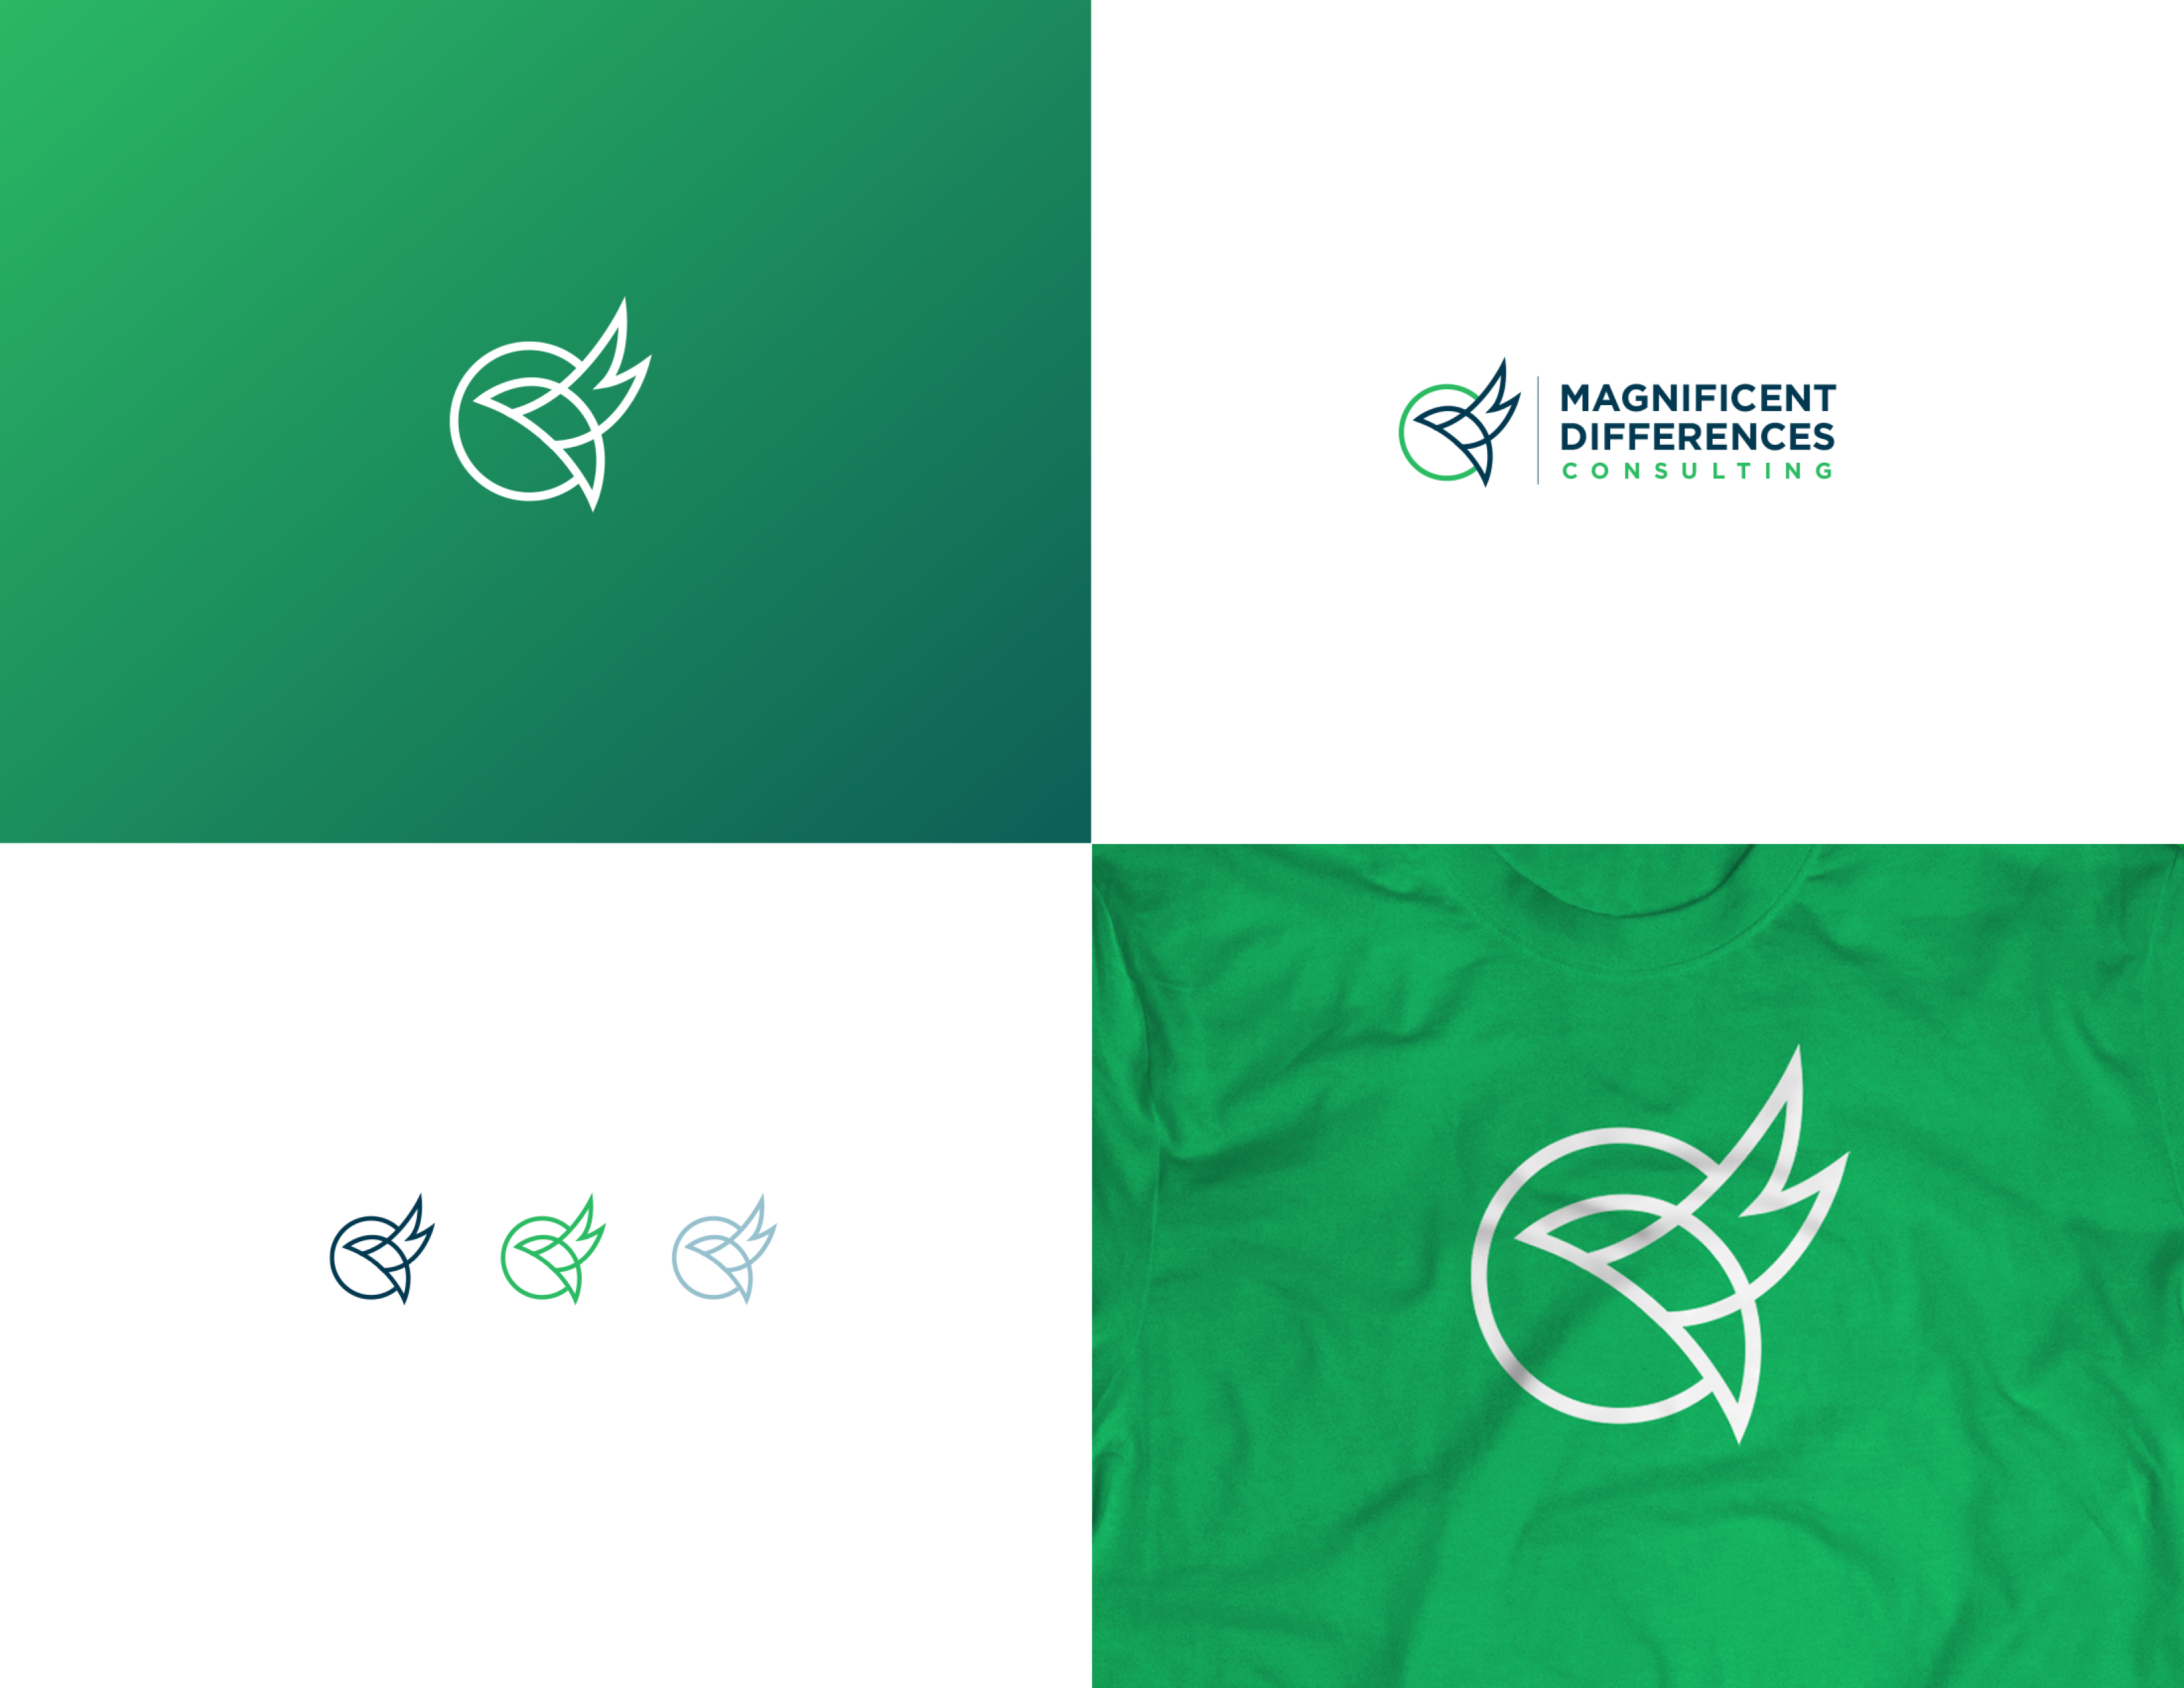 Magnificent Differences Consulting logo designs